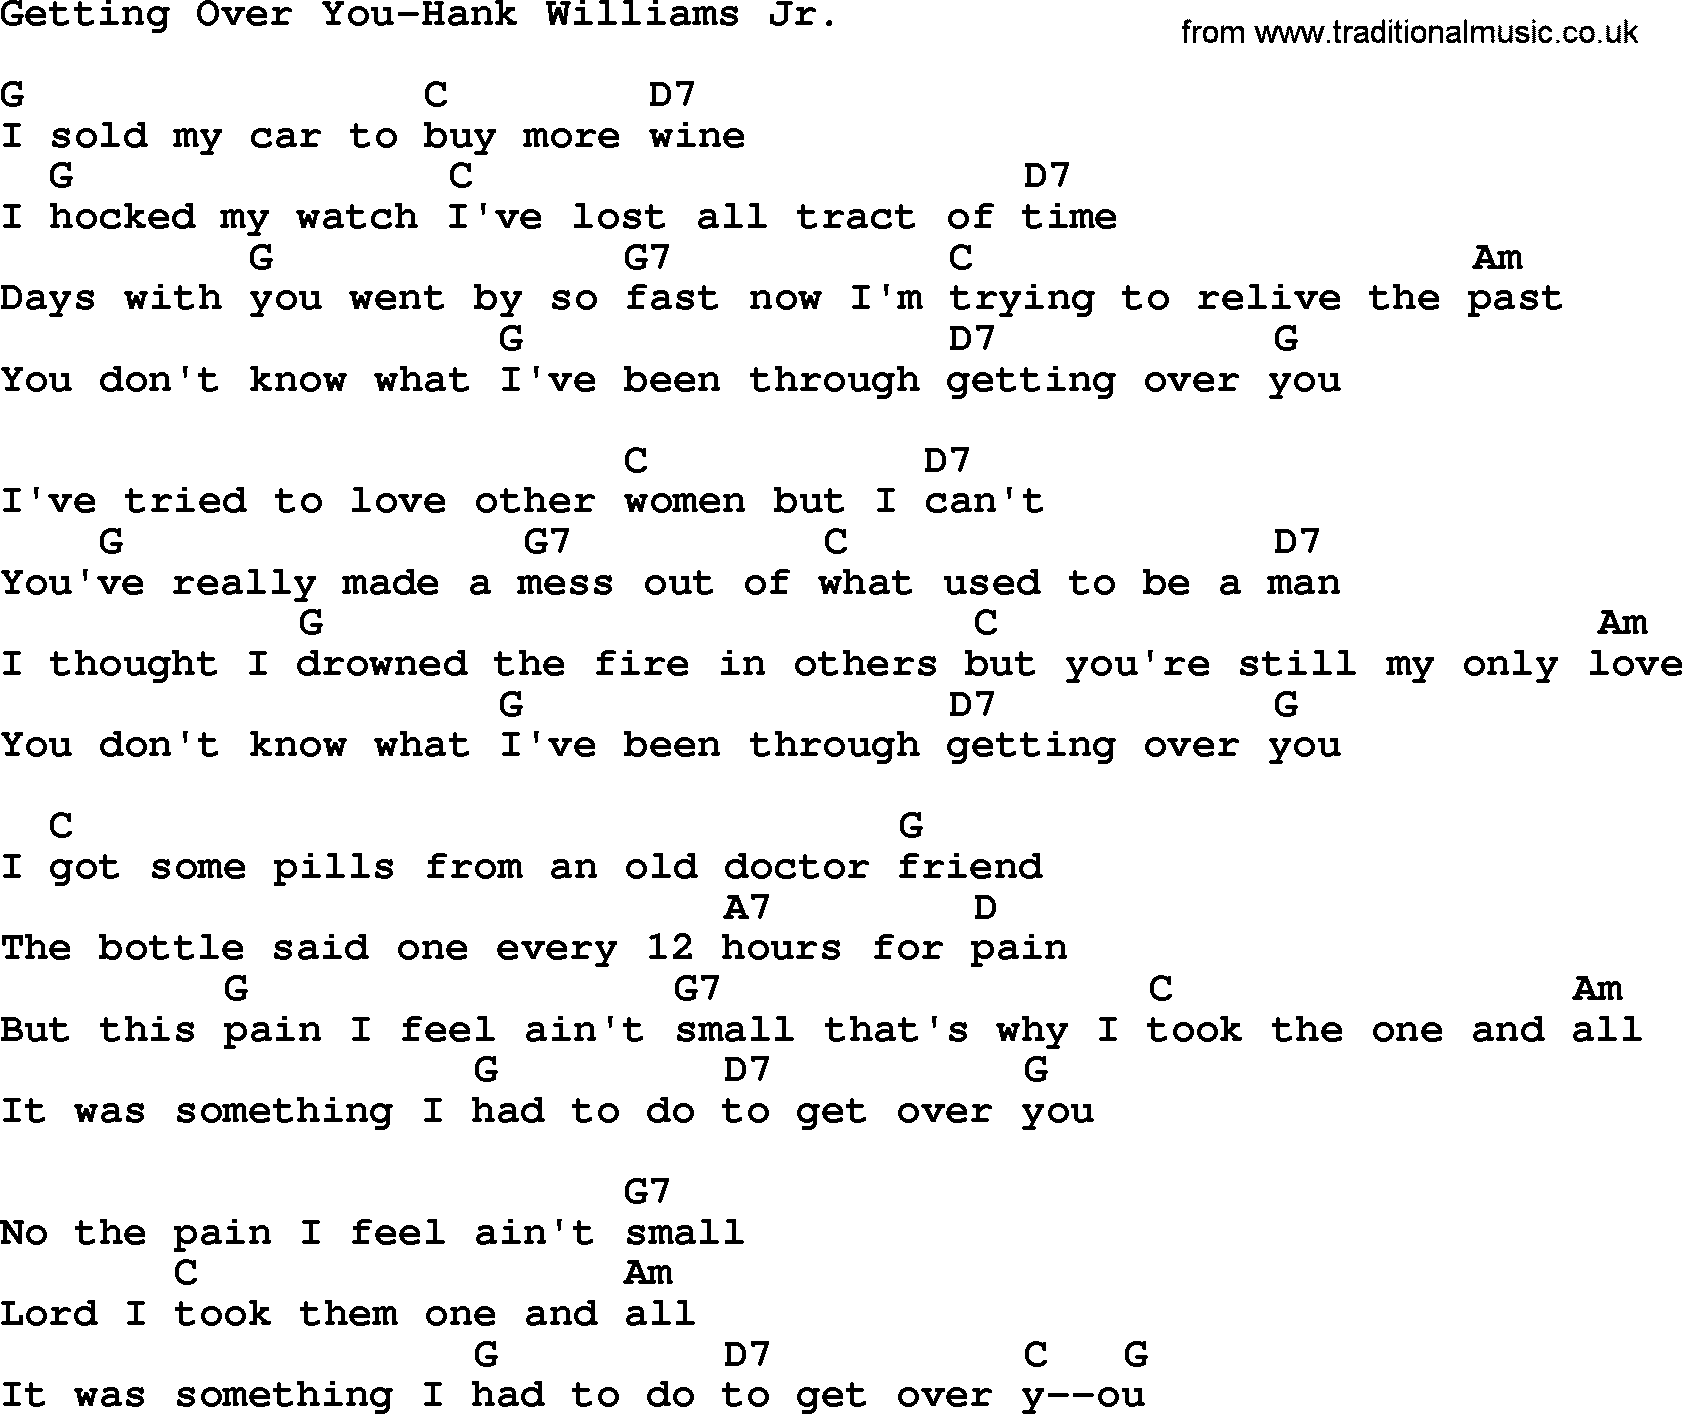 Country music song: Getting Over You-Hank Williams Jr lyrics and chords